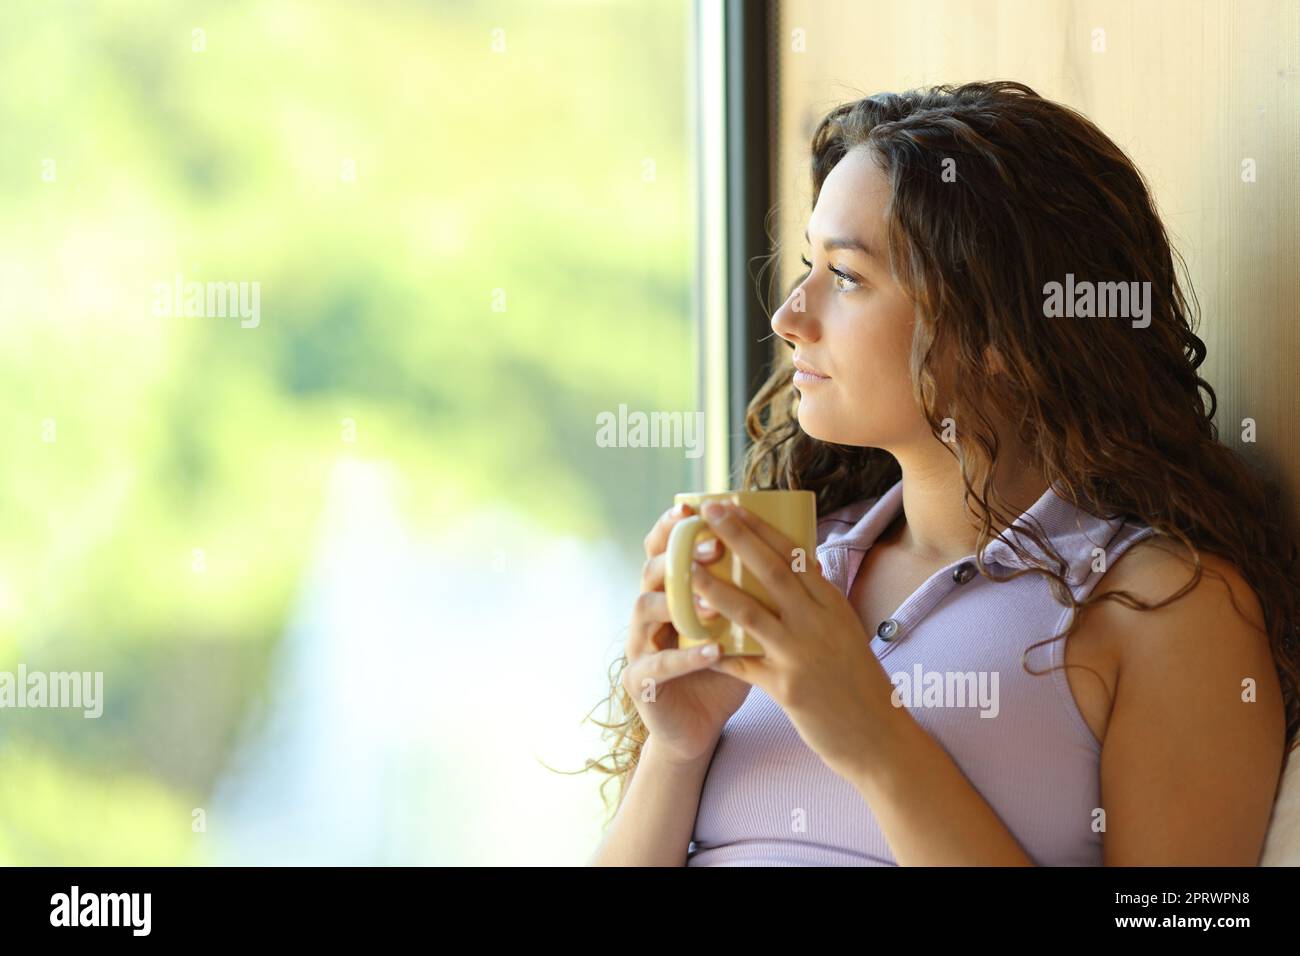 Woman relaxing drinking coffee looking through a window Stock Photo